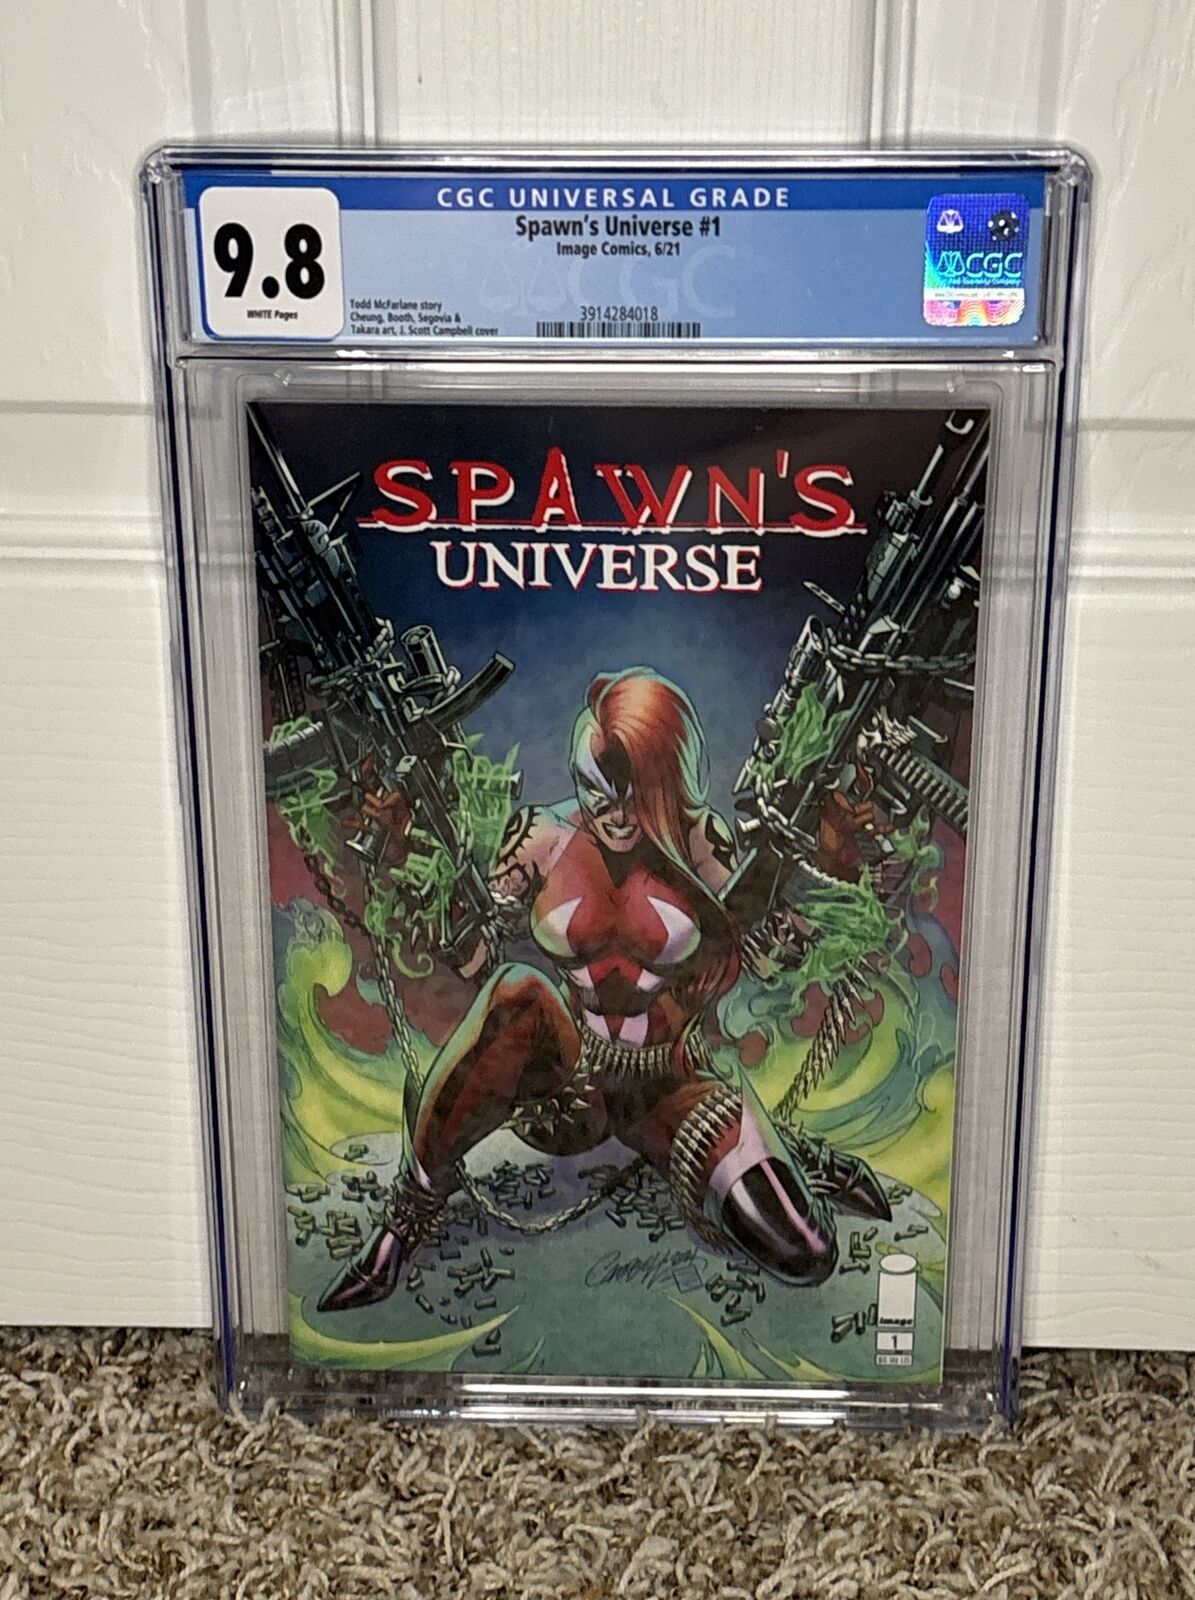 Spawn's Universe #1 * J Scott Campbell cover A * graded CGC 9.8 NM/MT * 2021